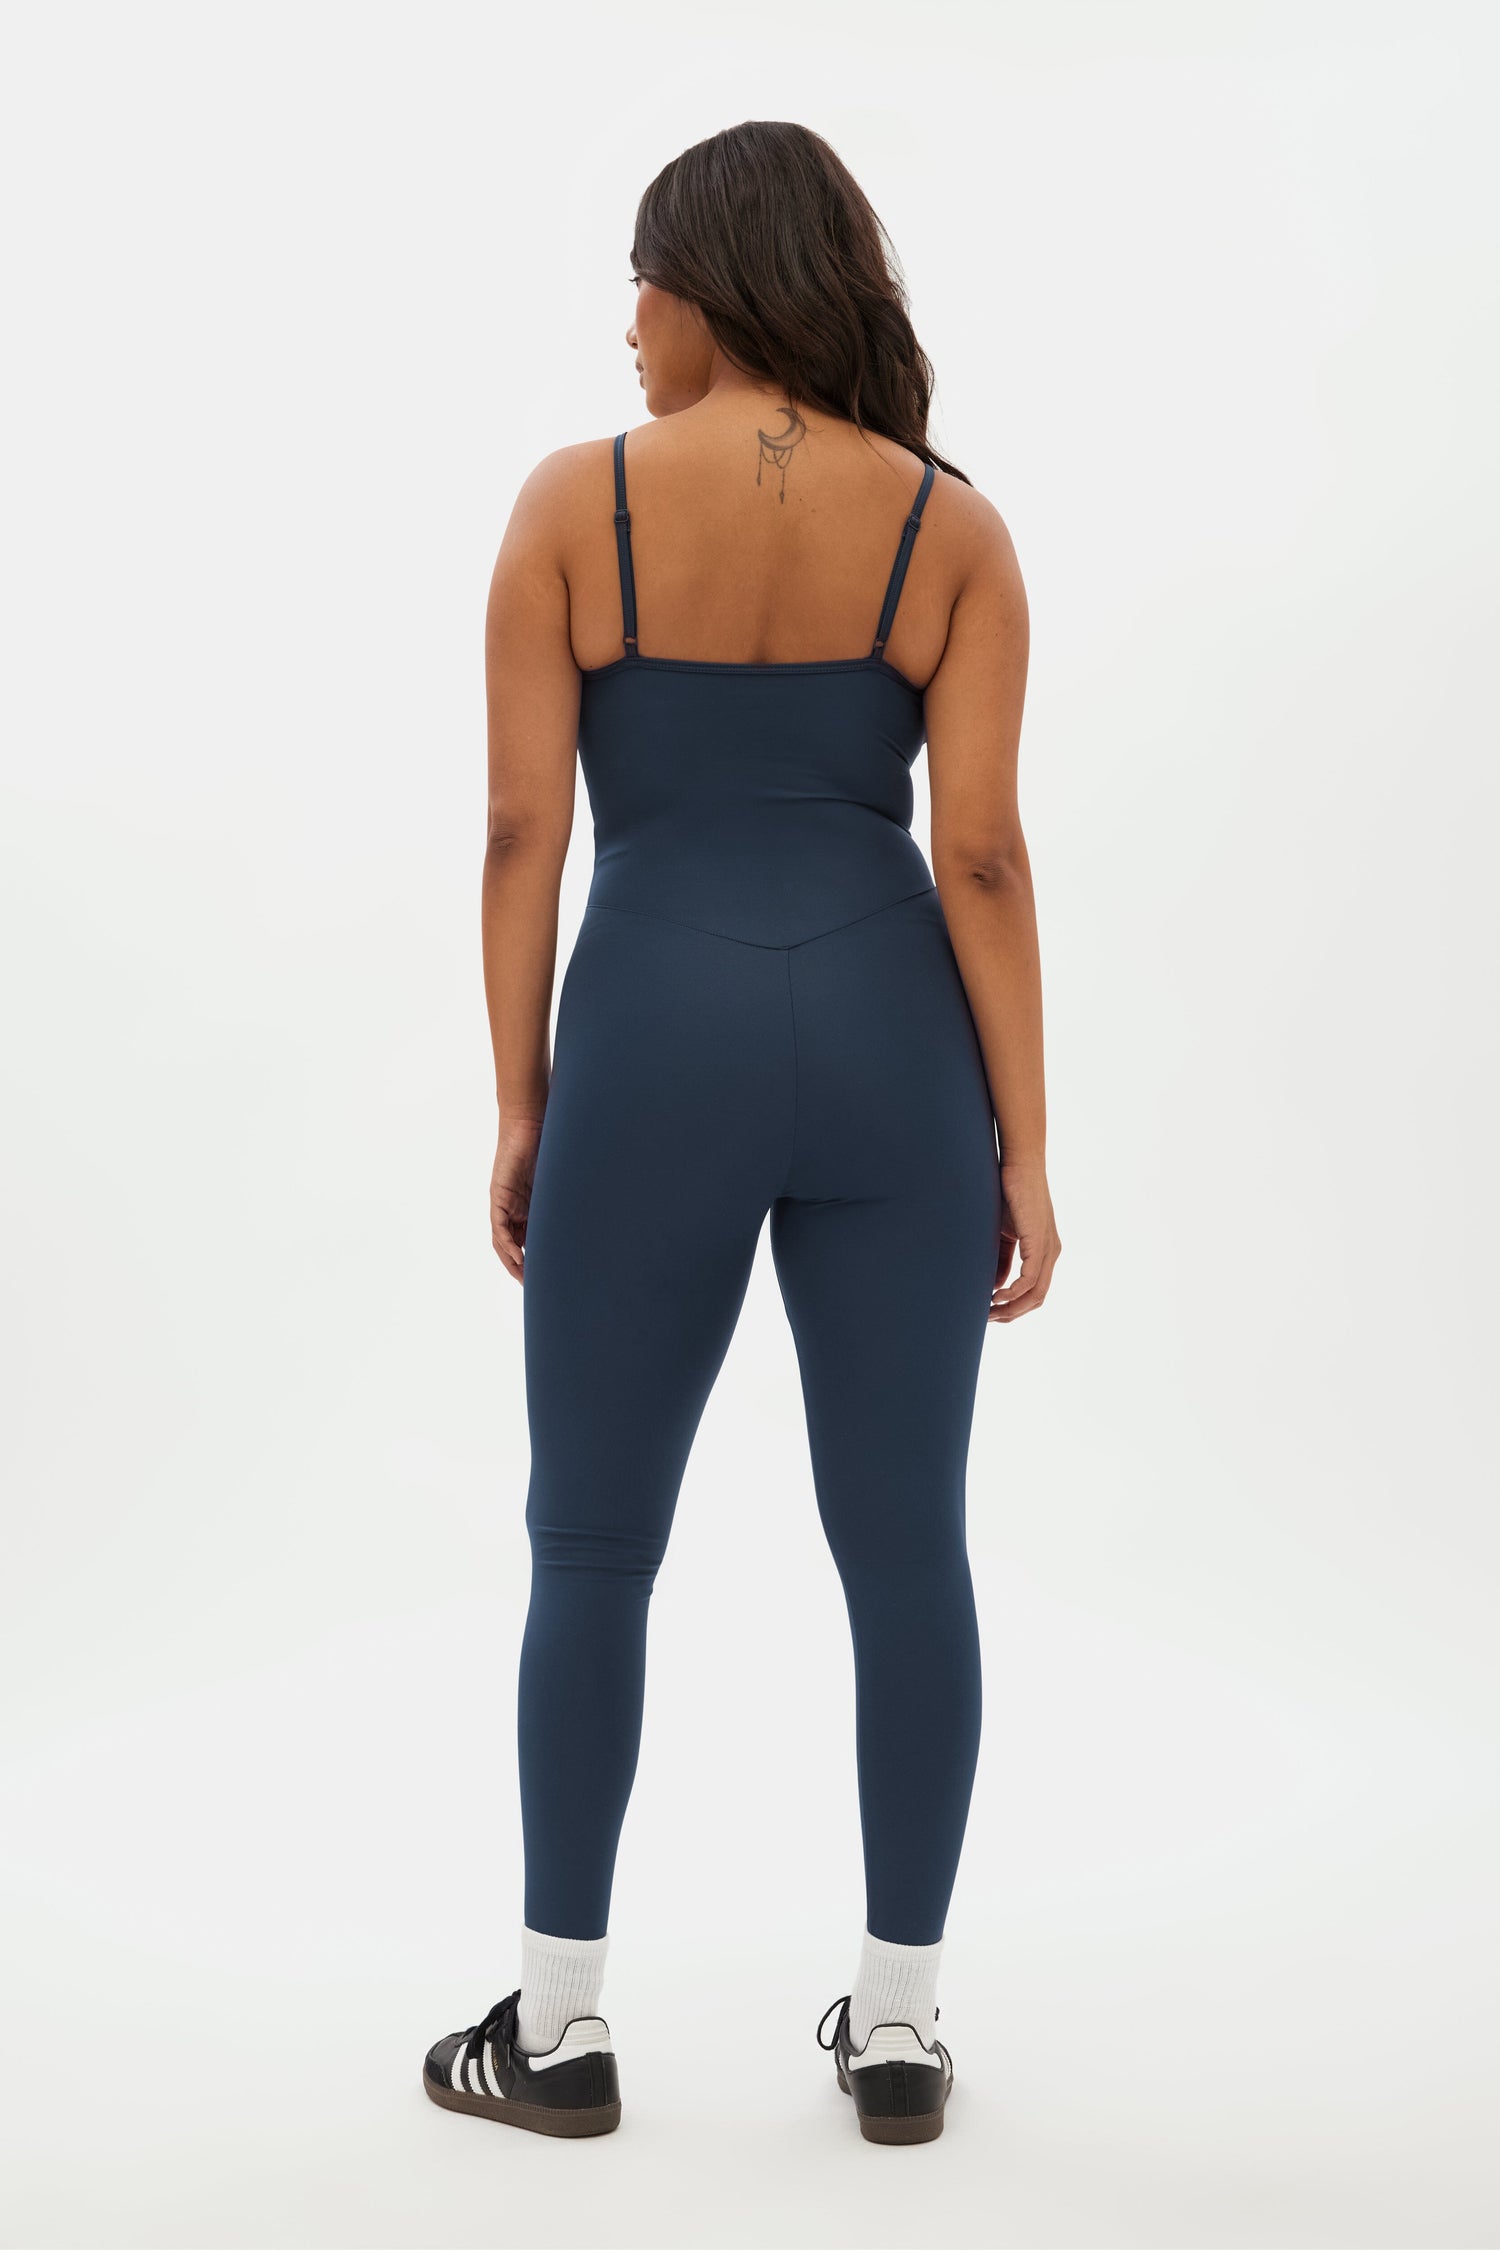 Girlfriend Collective - Training & Yoga Unitard - Made from recycled plastic bottles - Weekendbee - sustainable sportswear